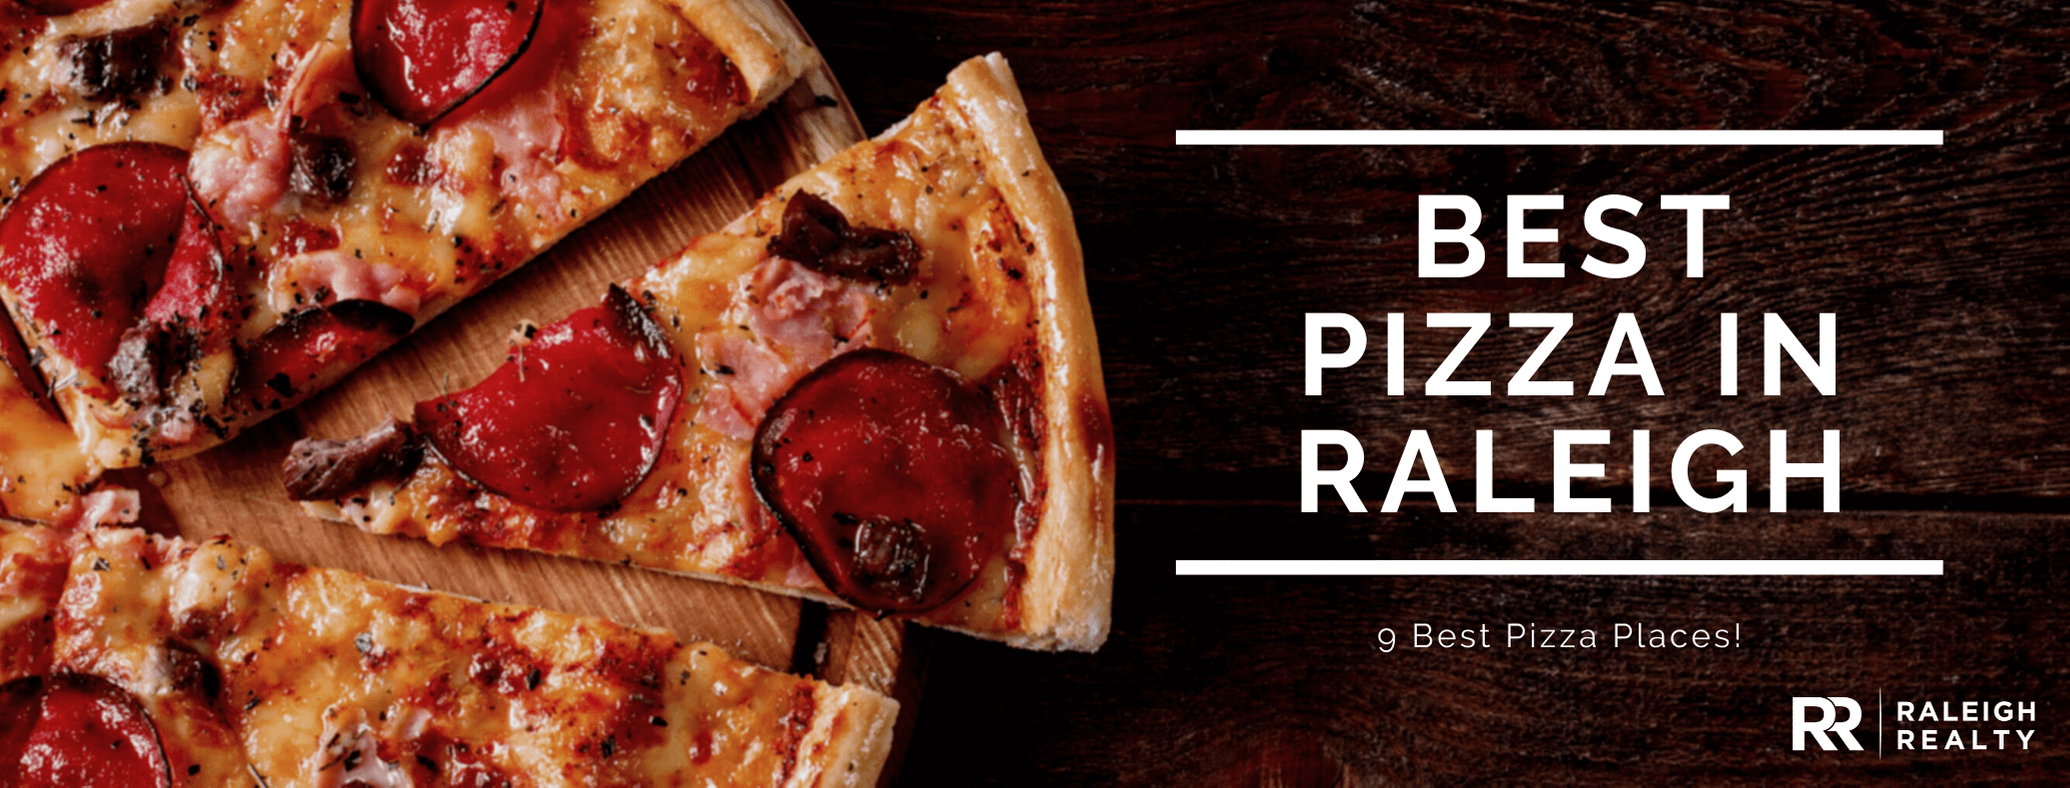 Where's the Best Pizza in Raleigh - 9 Best Places!